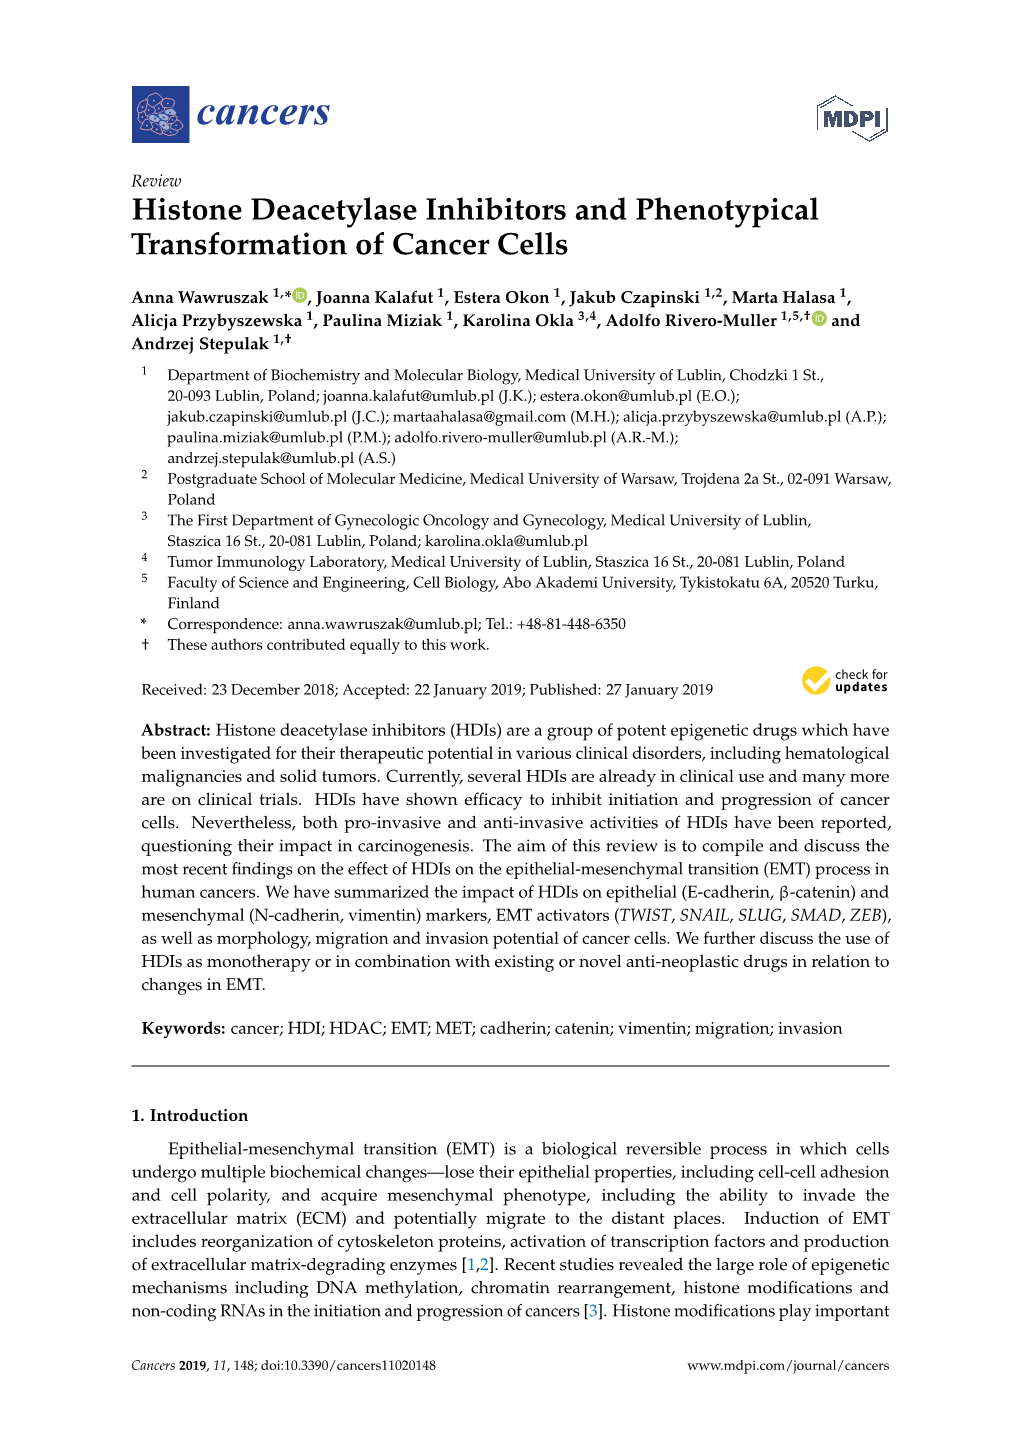 Histone Deacetylase Inhibitors and Phenotypical Transformation of Cancer Cells